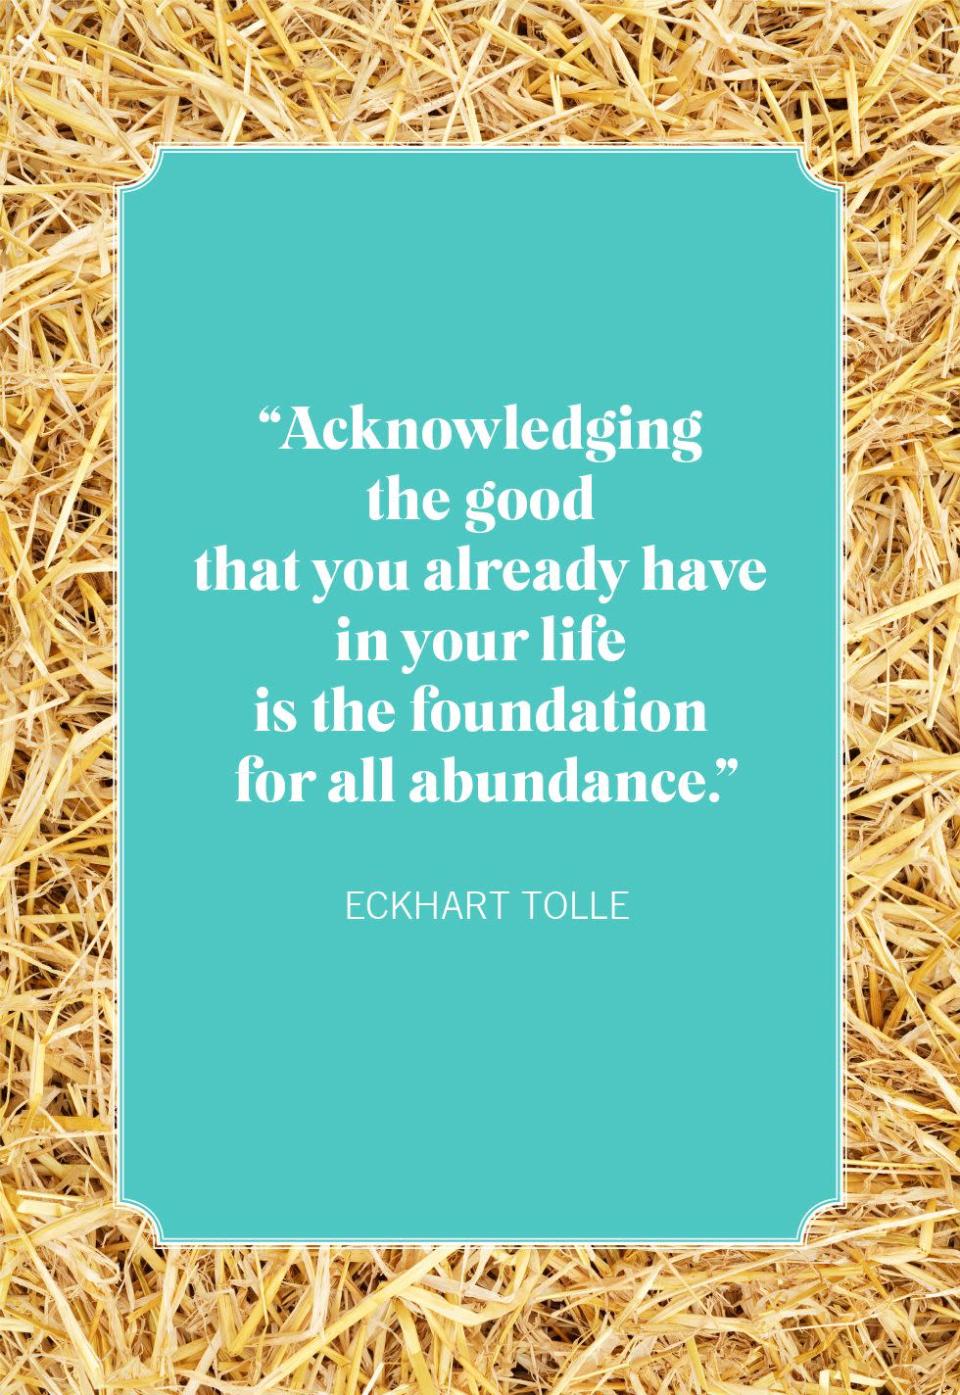 <p>"Acknowledging the good that you already have in your life is the foundation for all abundance."</p>